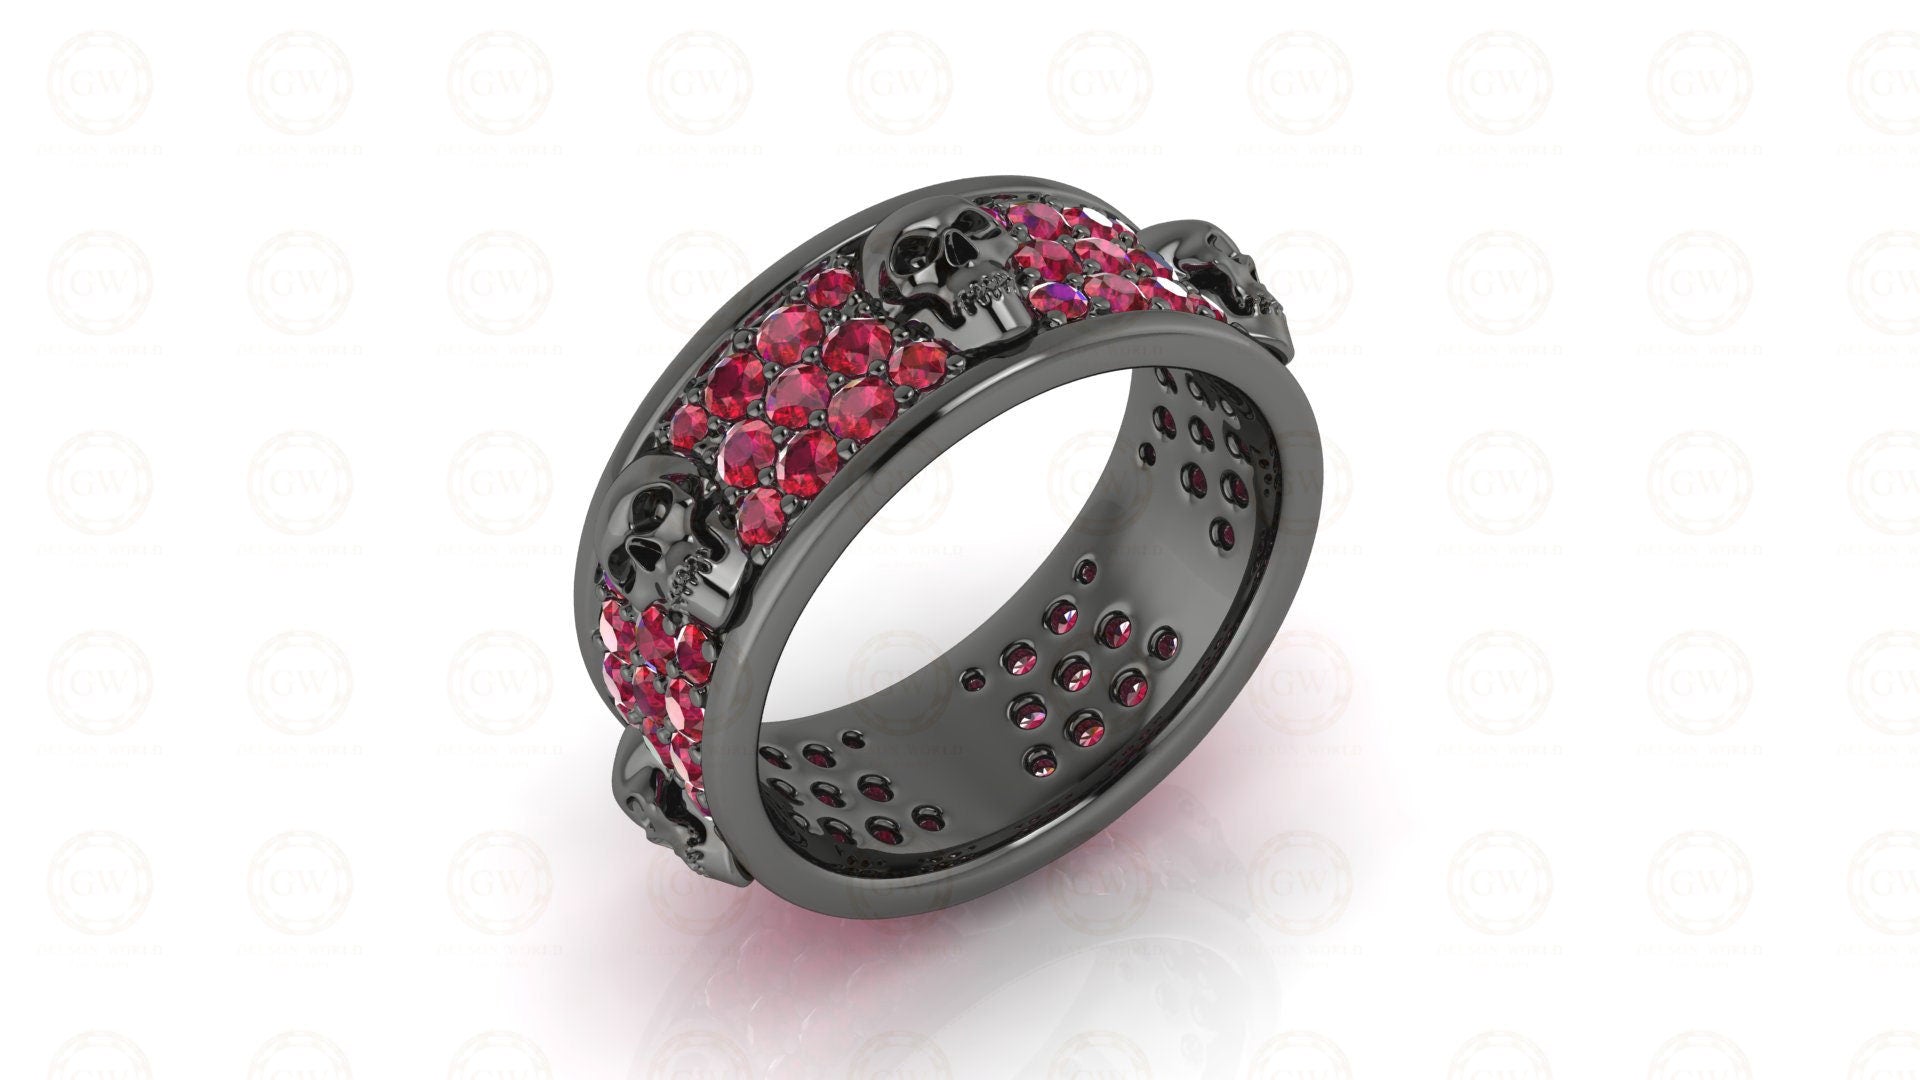 8 mm Wide Unique Gothic Skull Wedding Band, Birthstone Ring, July Ruby gemstone ring, 3 Row Anniversary Ring, Eternity Band, Sterling Silver